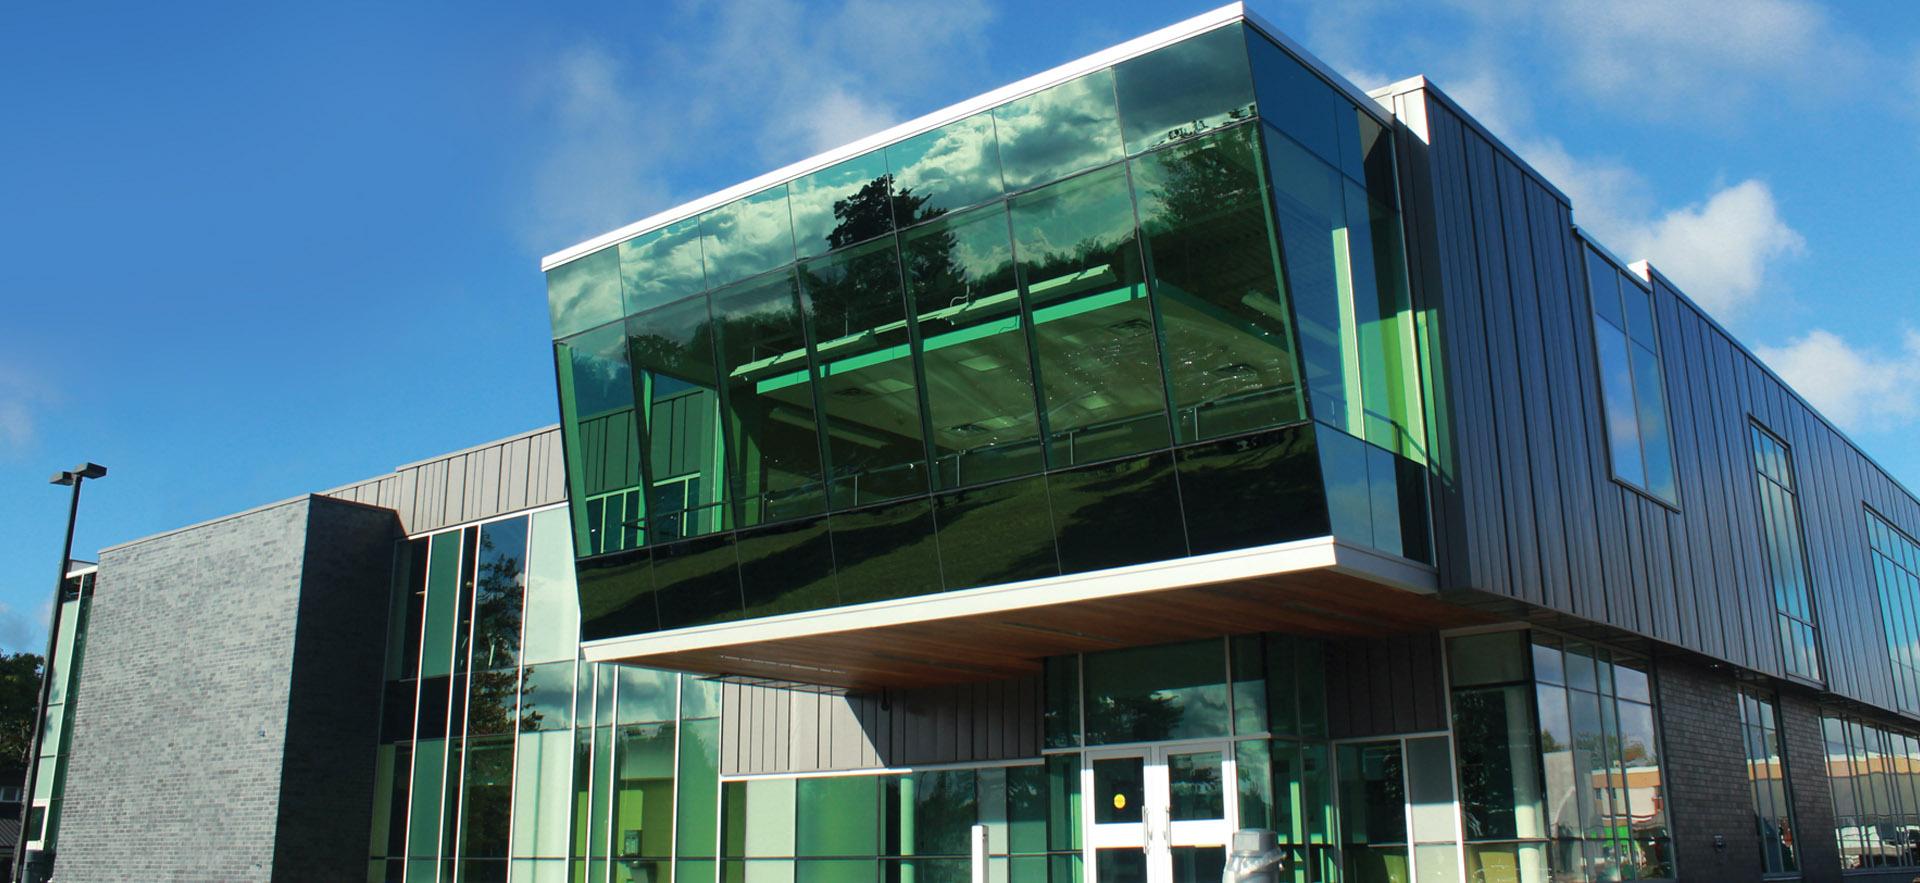 Exterior view of the health and wellness centre